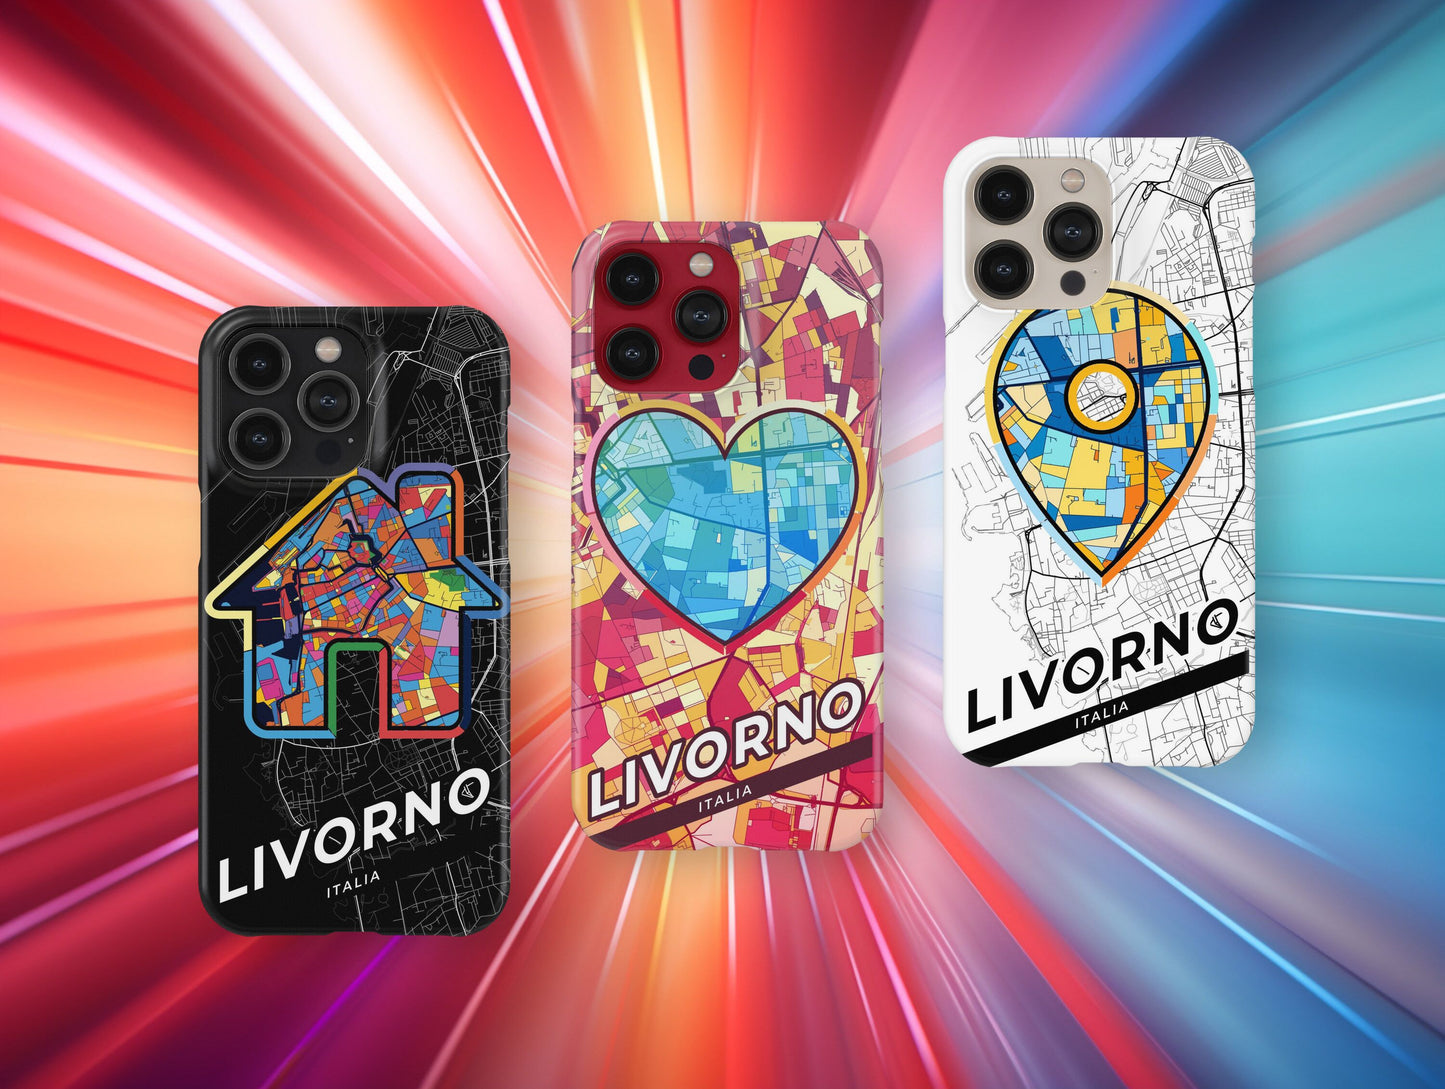 Livorno Italy slim phone case with colorful icon. Birthday, wedding or housewarming gift. Couple match cases.